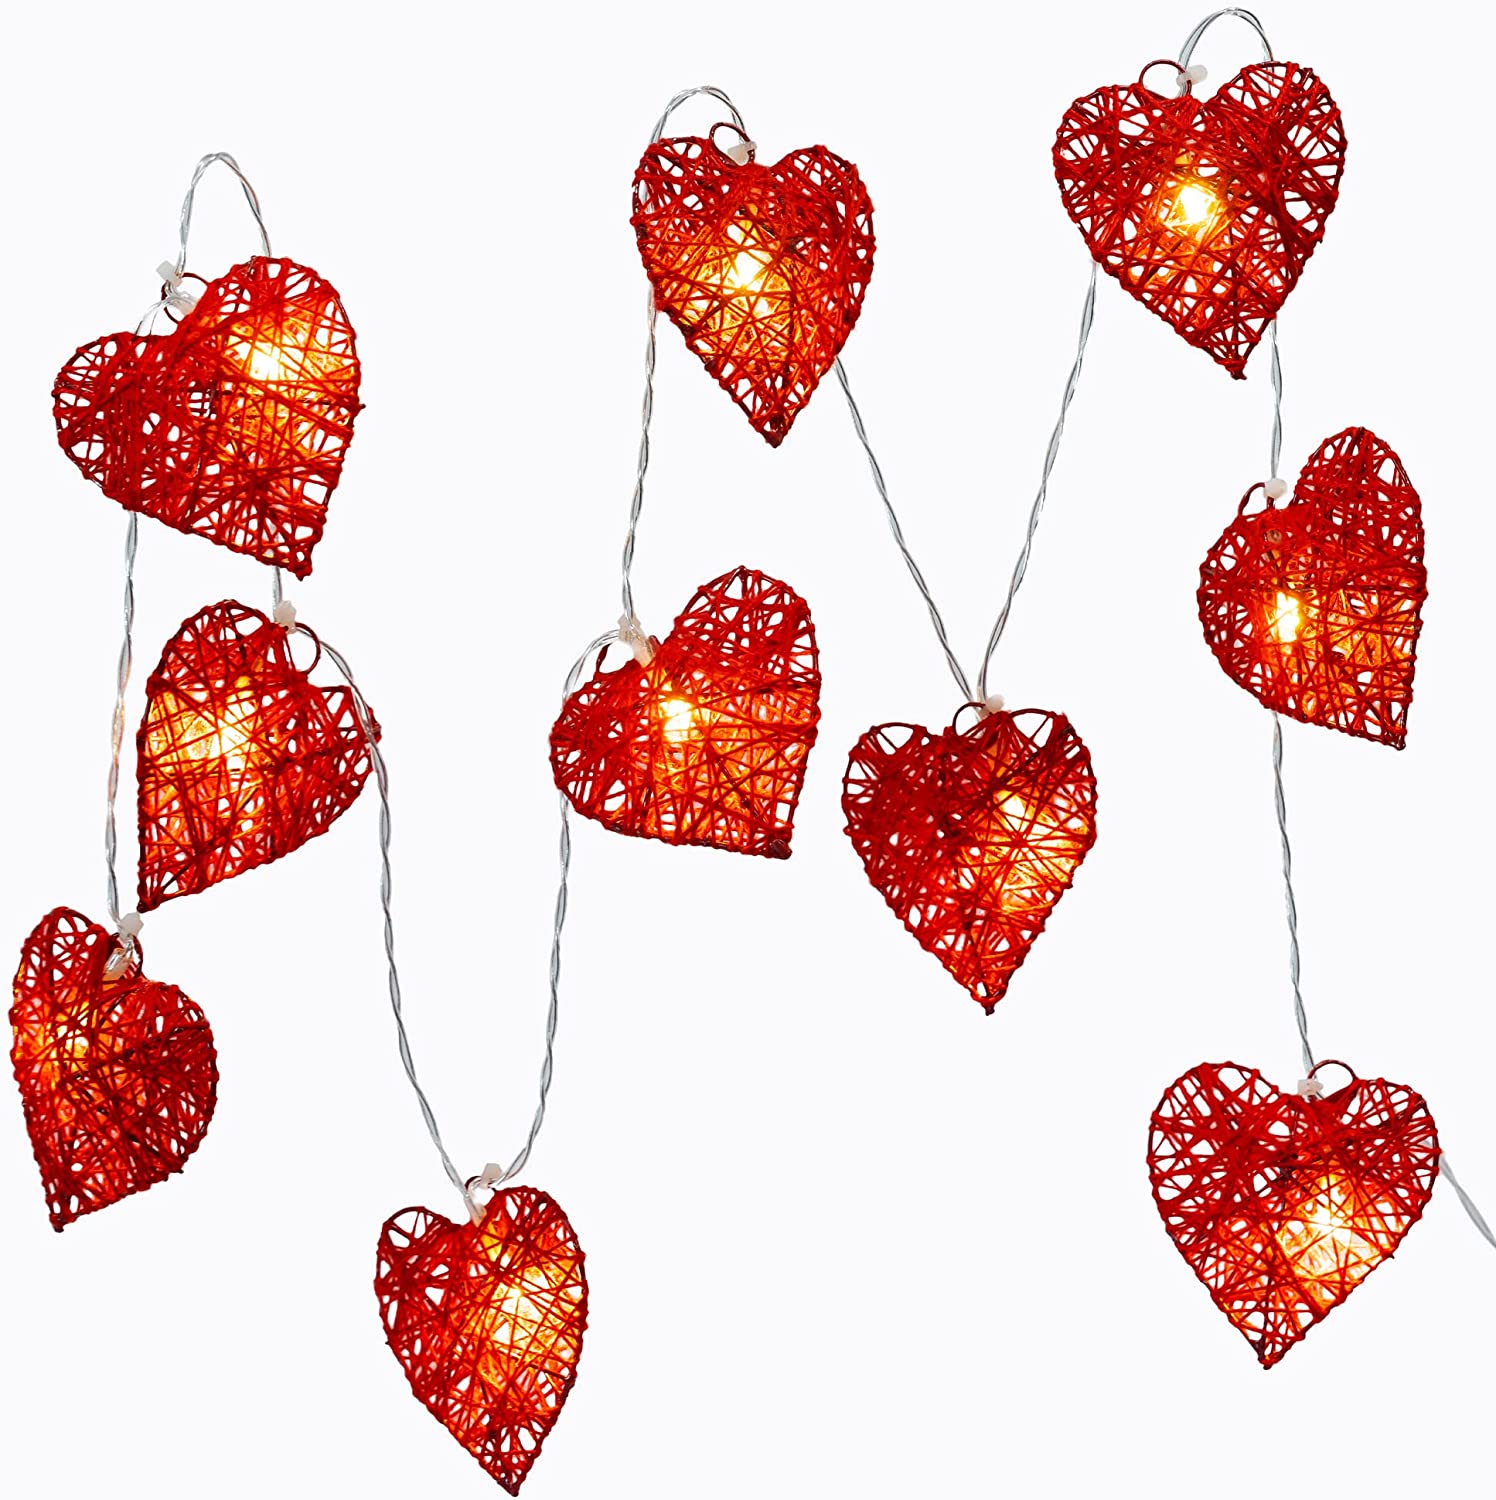 5.5 feet 10 LED String Fairy Light w/Metal Twine Covered Red Hearts ...